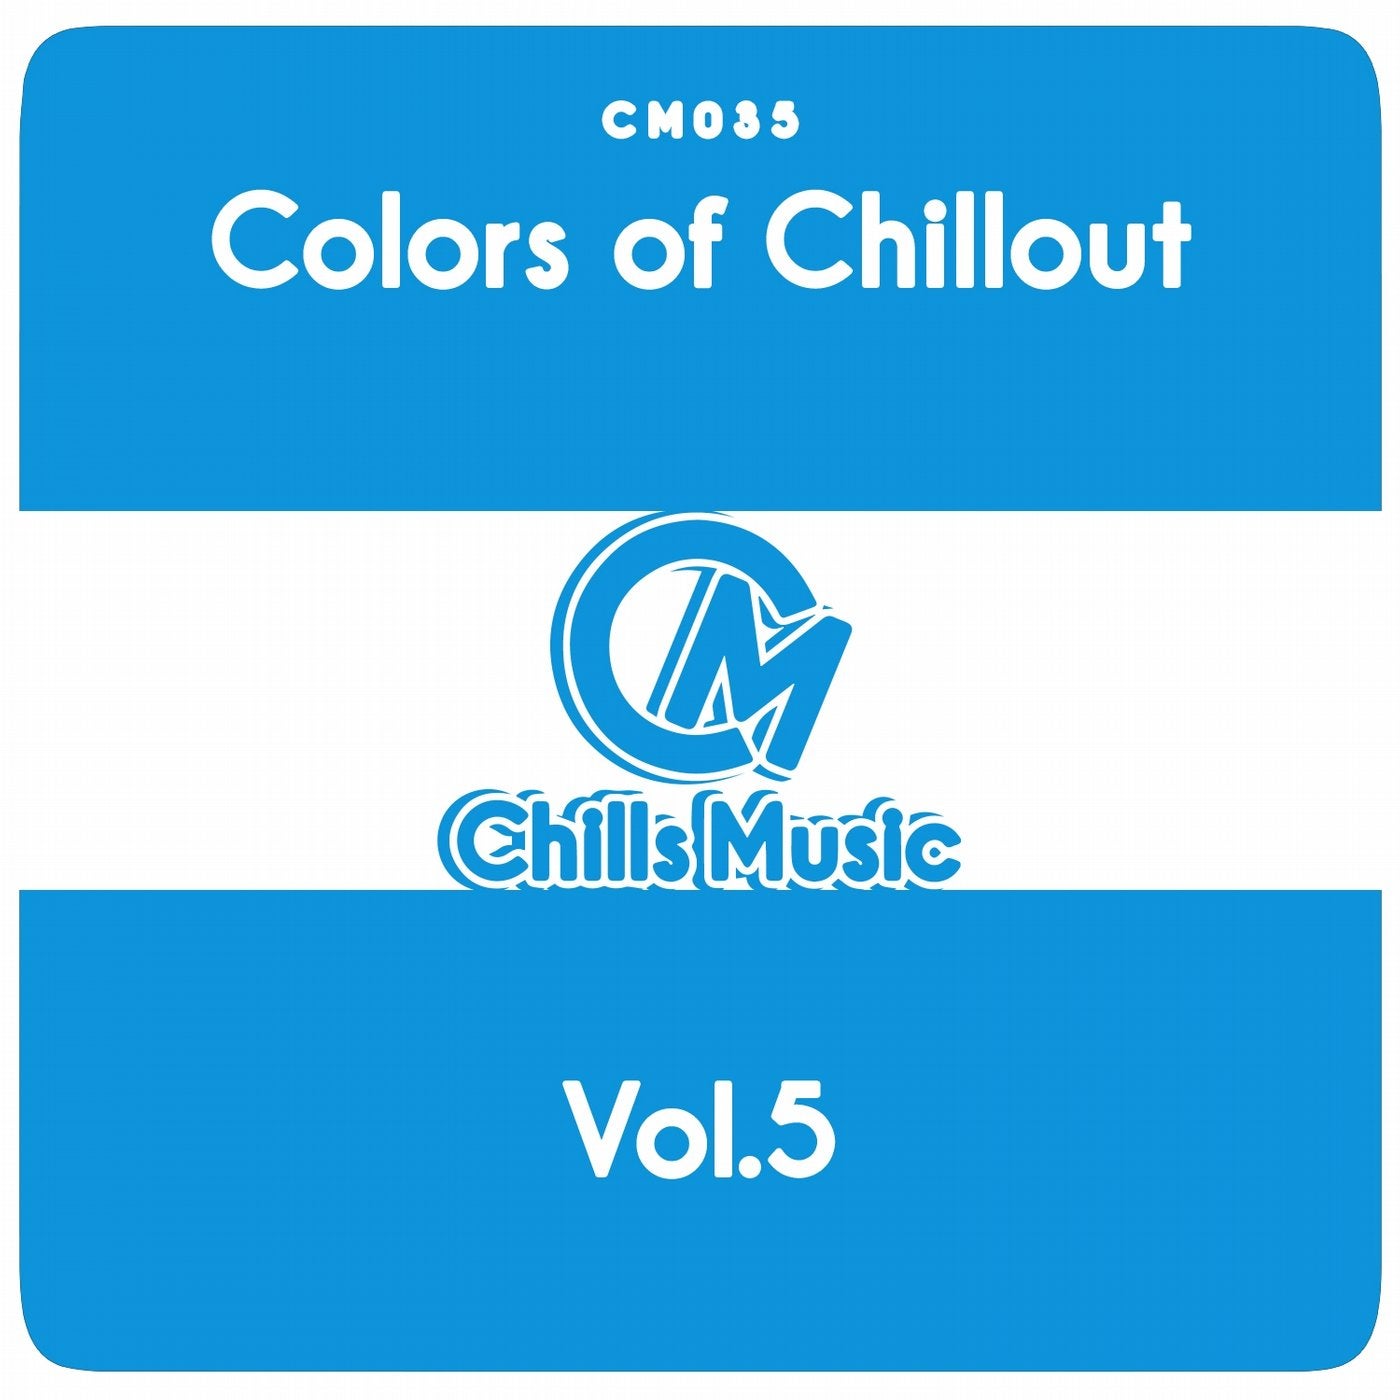 Colors of Chillout, Vol. 5